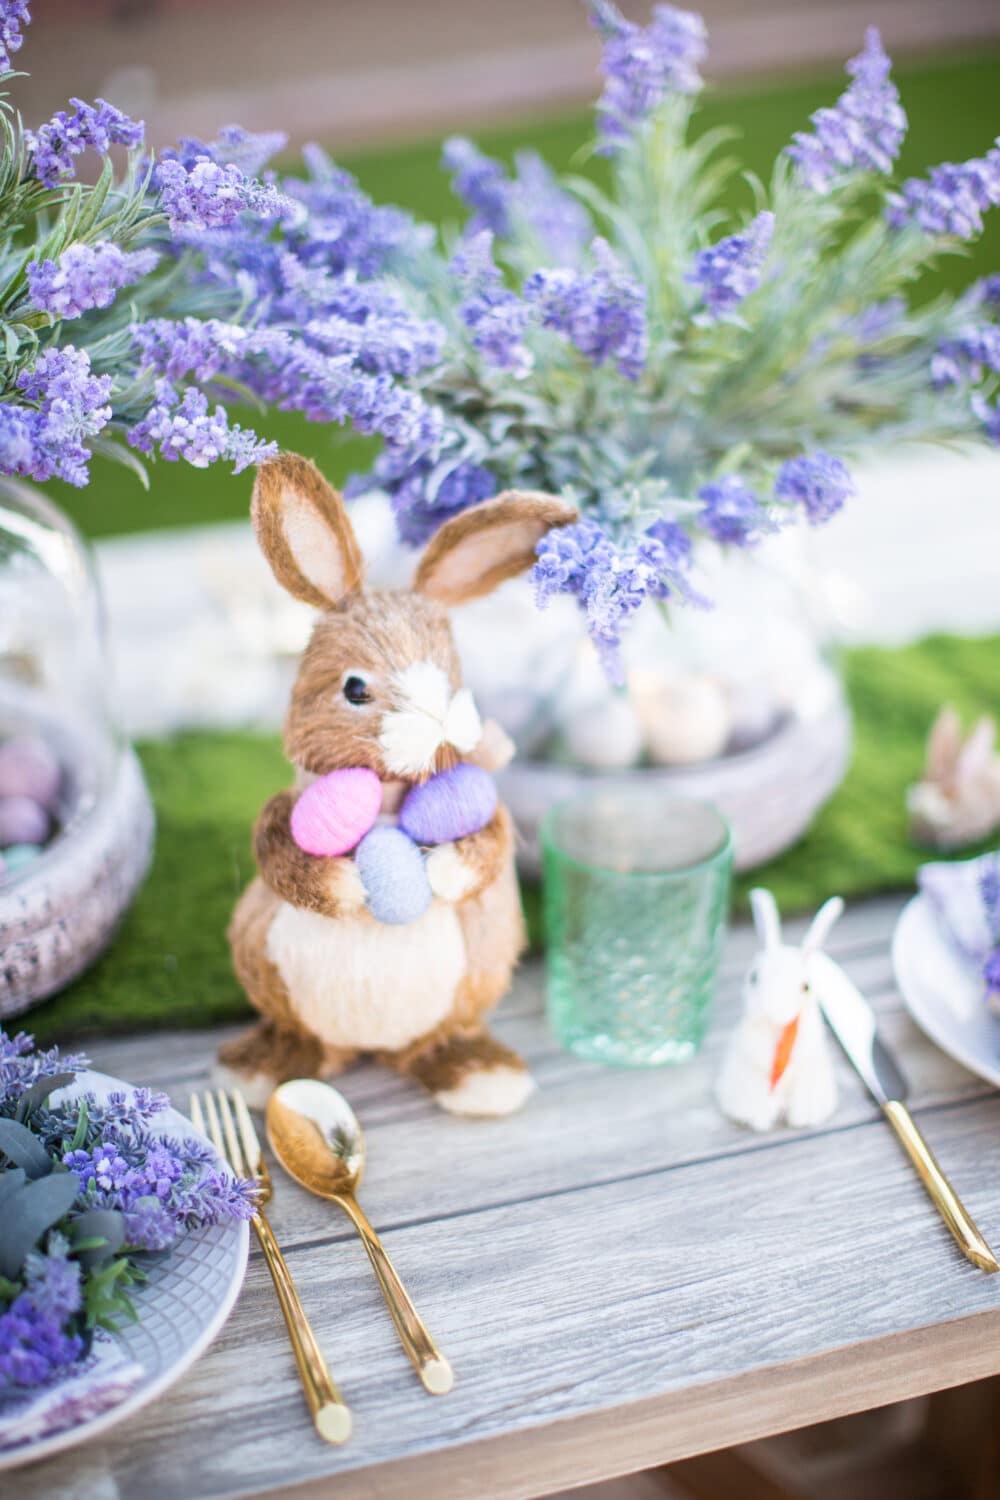 How to make an Easter Centerpiece